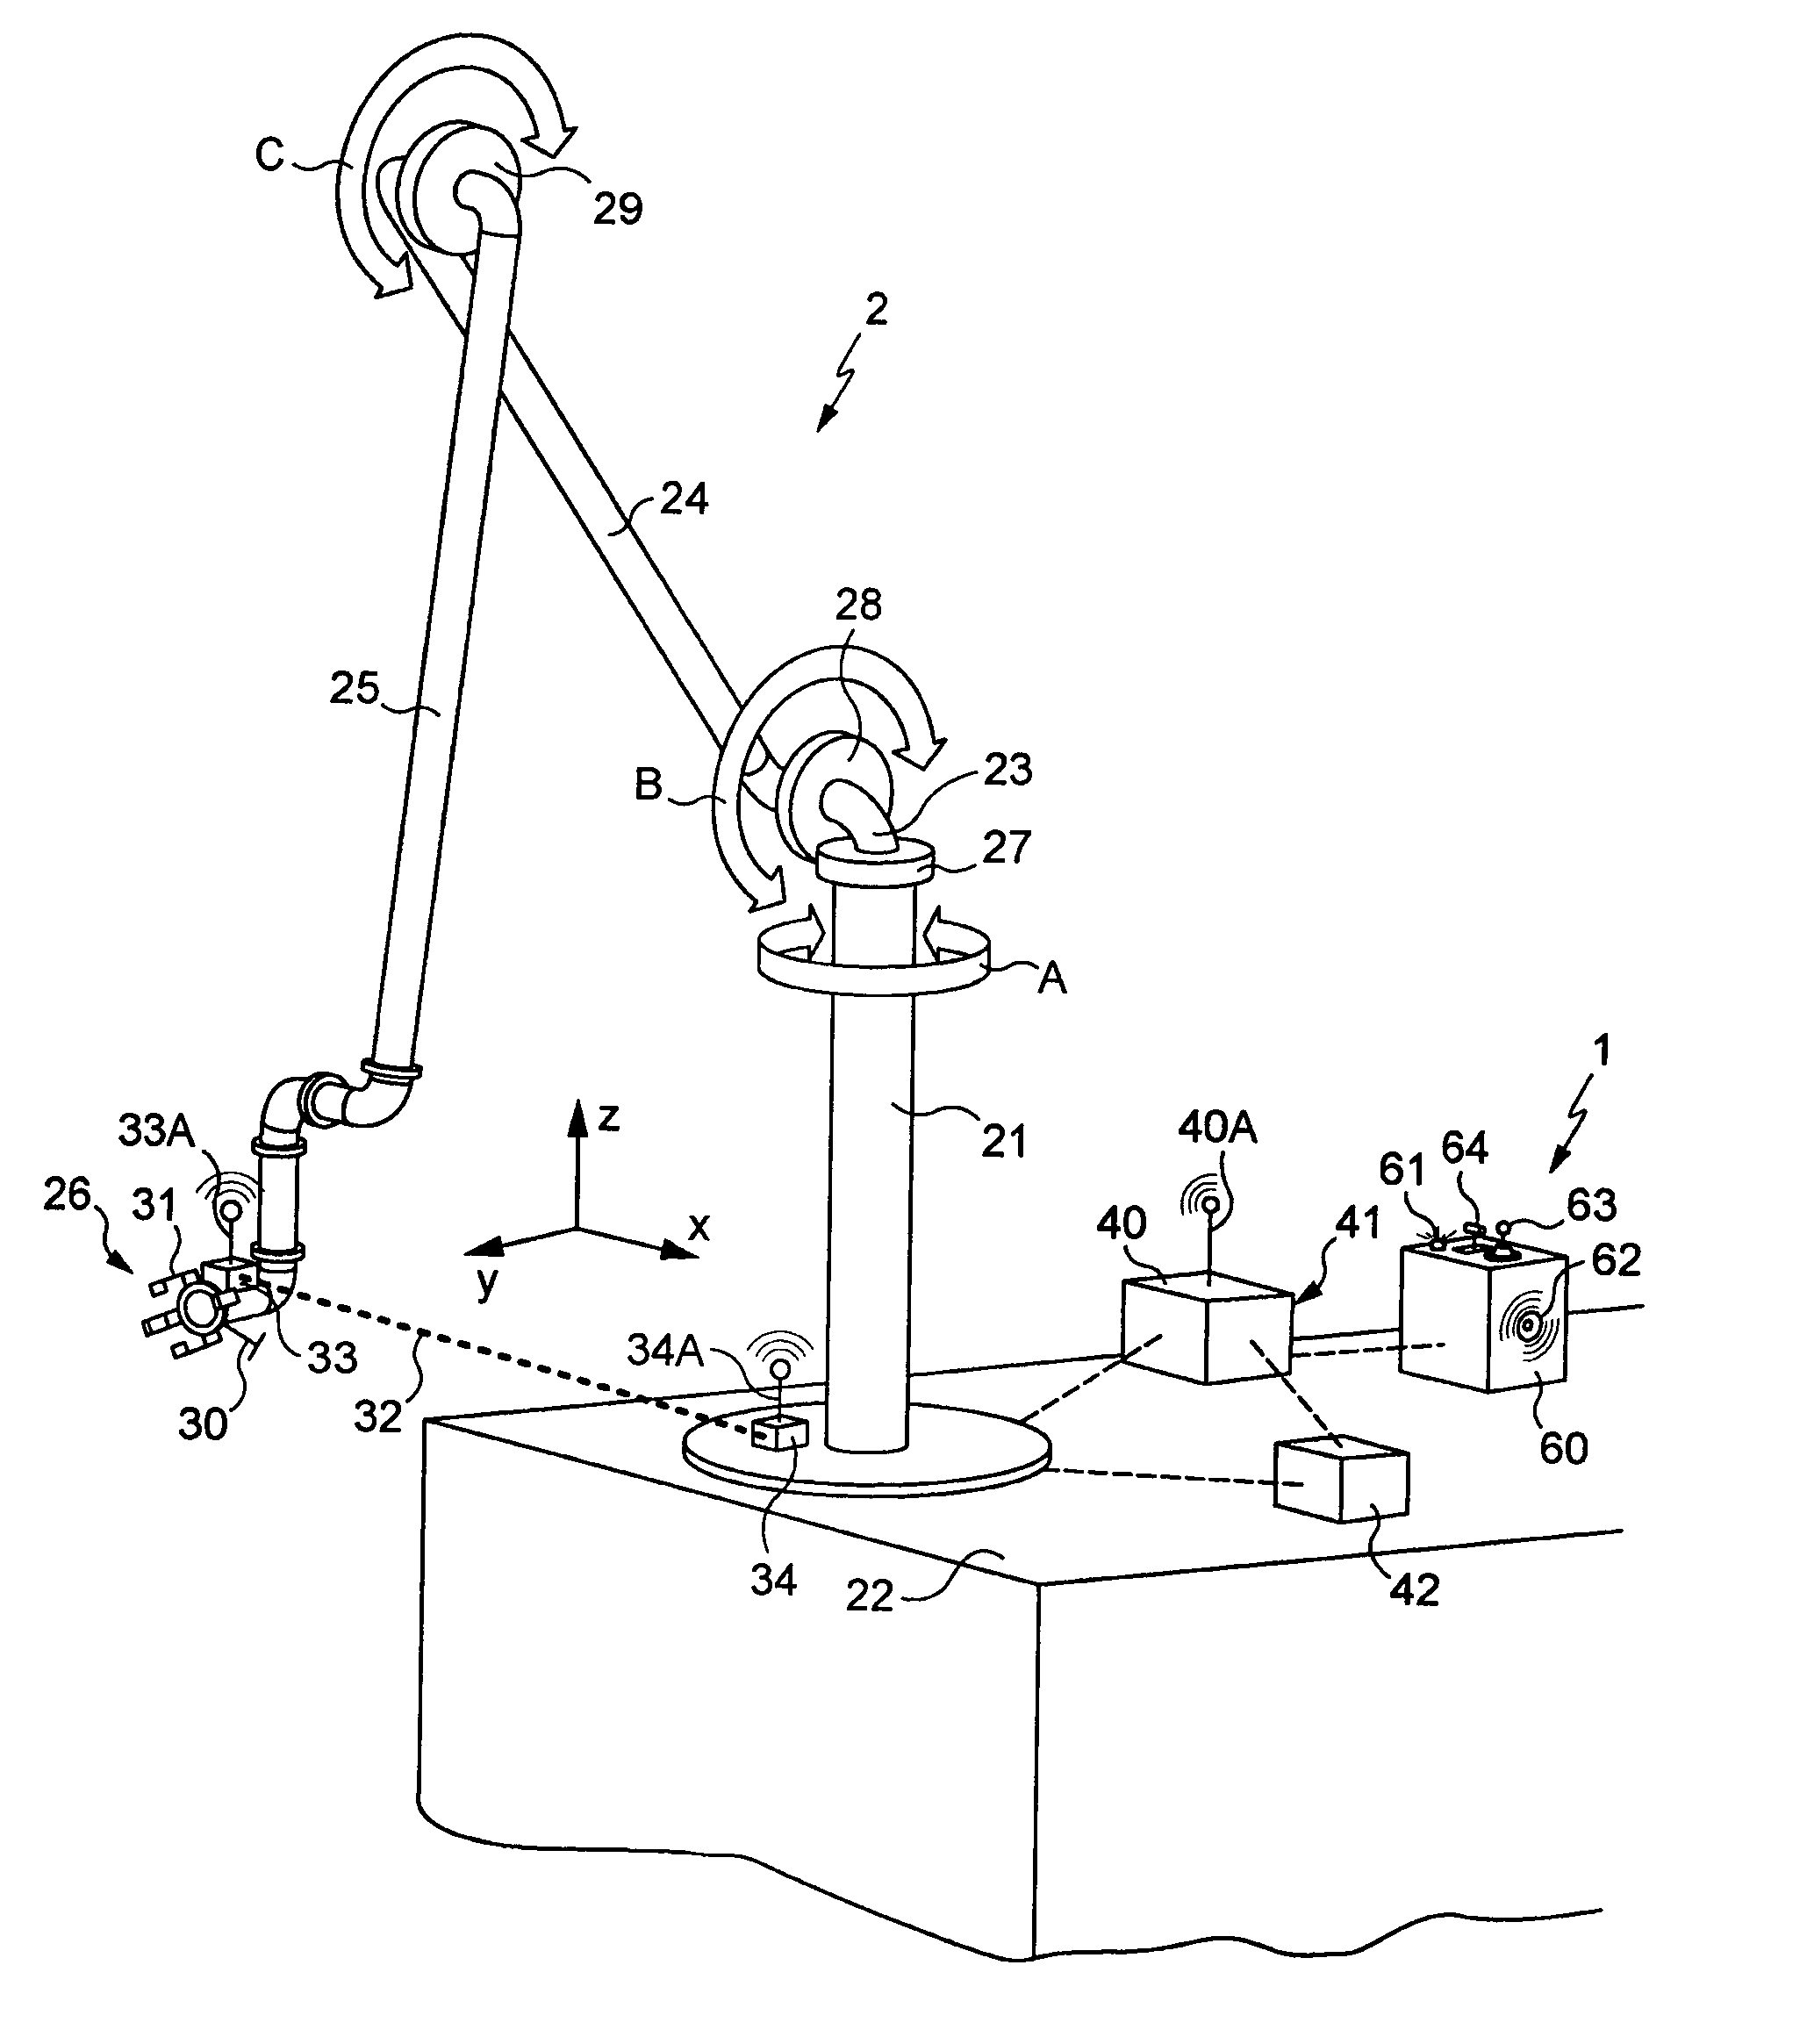 Device for providing information on positioning of a moveable coupling of a marine fluid loading system